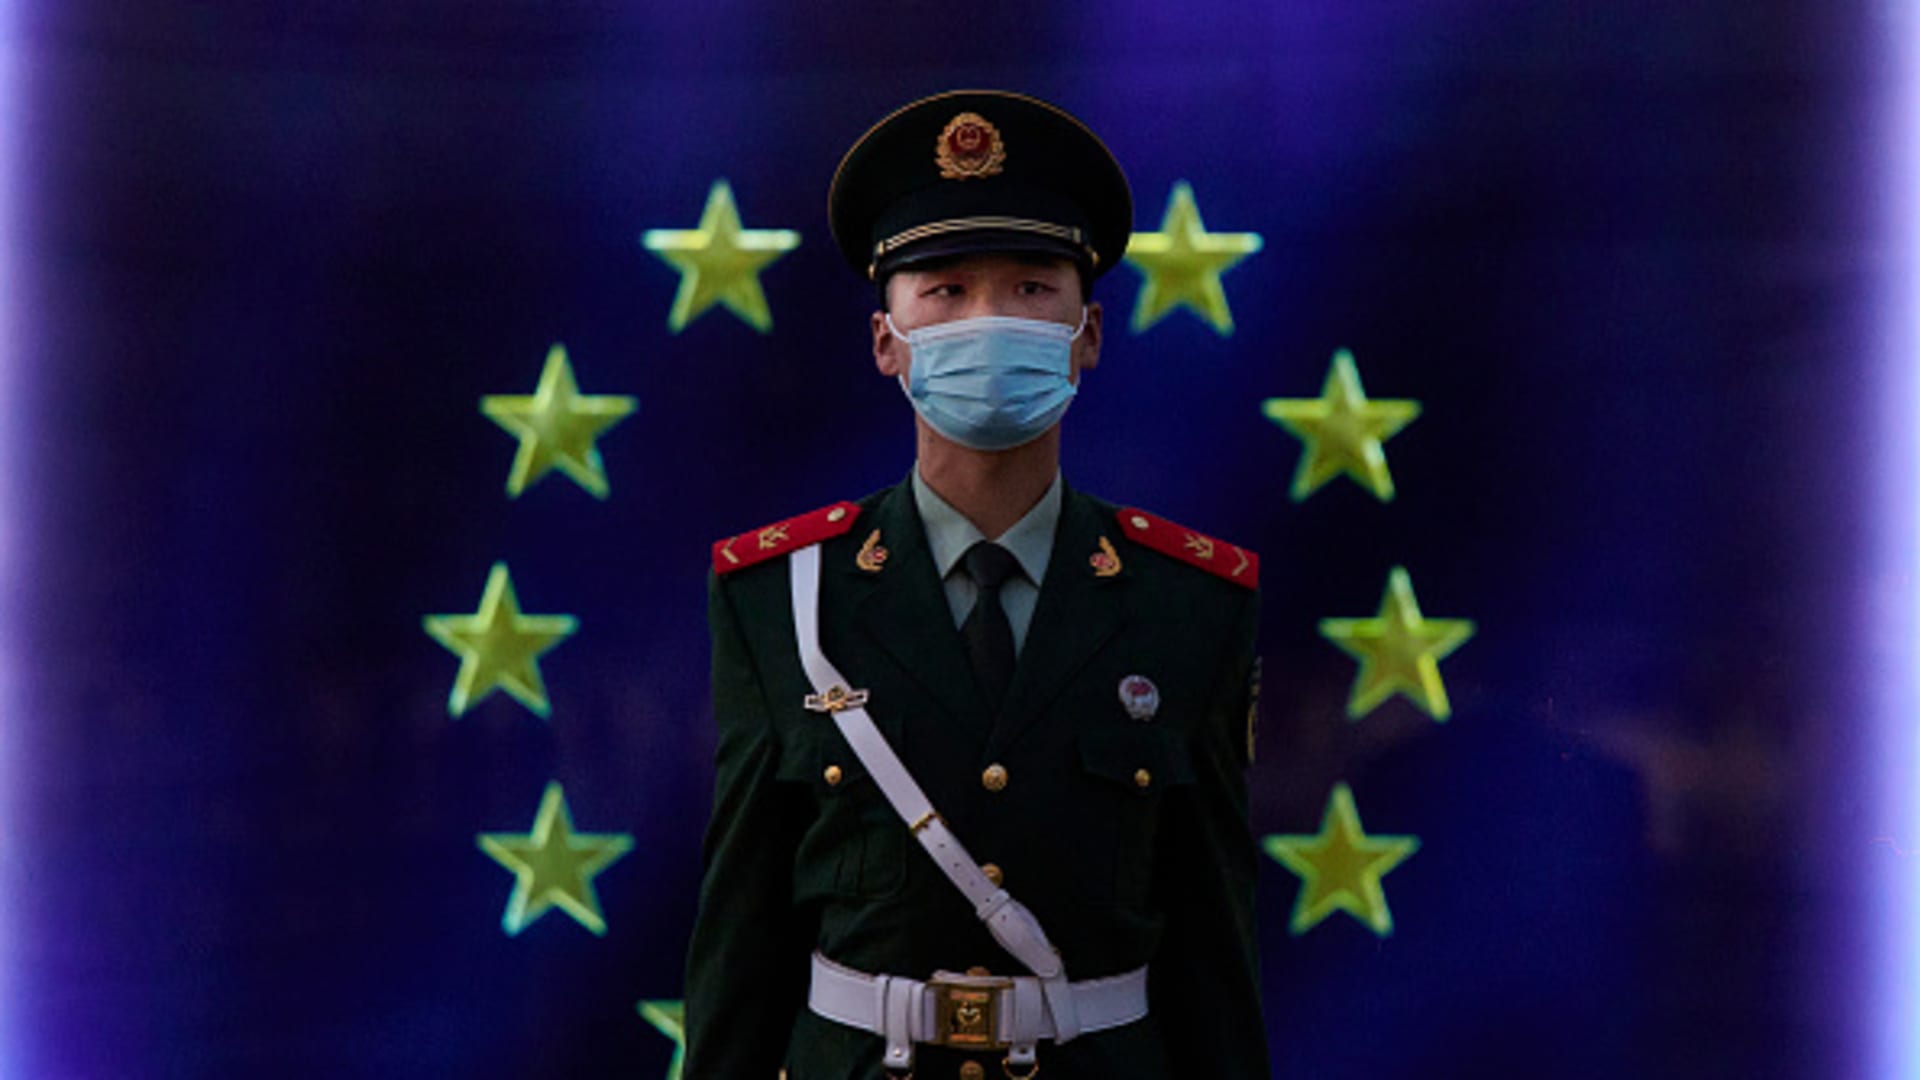 As China and the U.S. redefine geopolitics, Europe faces a win-win situation